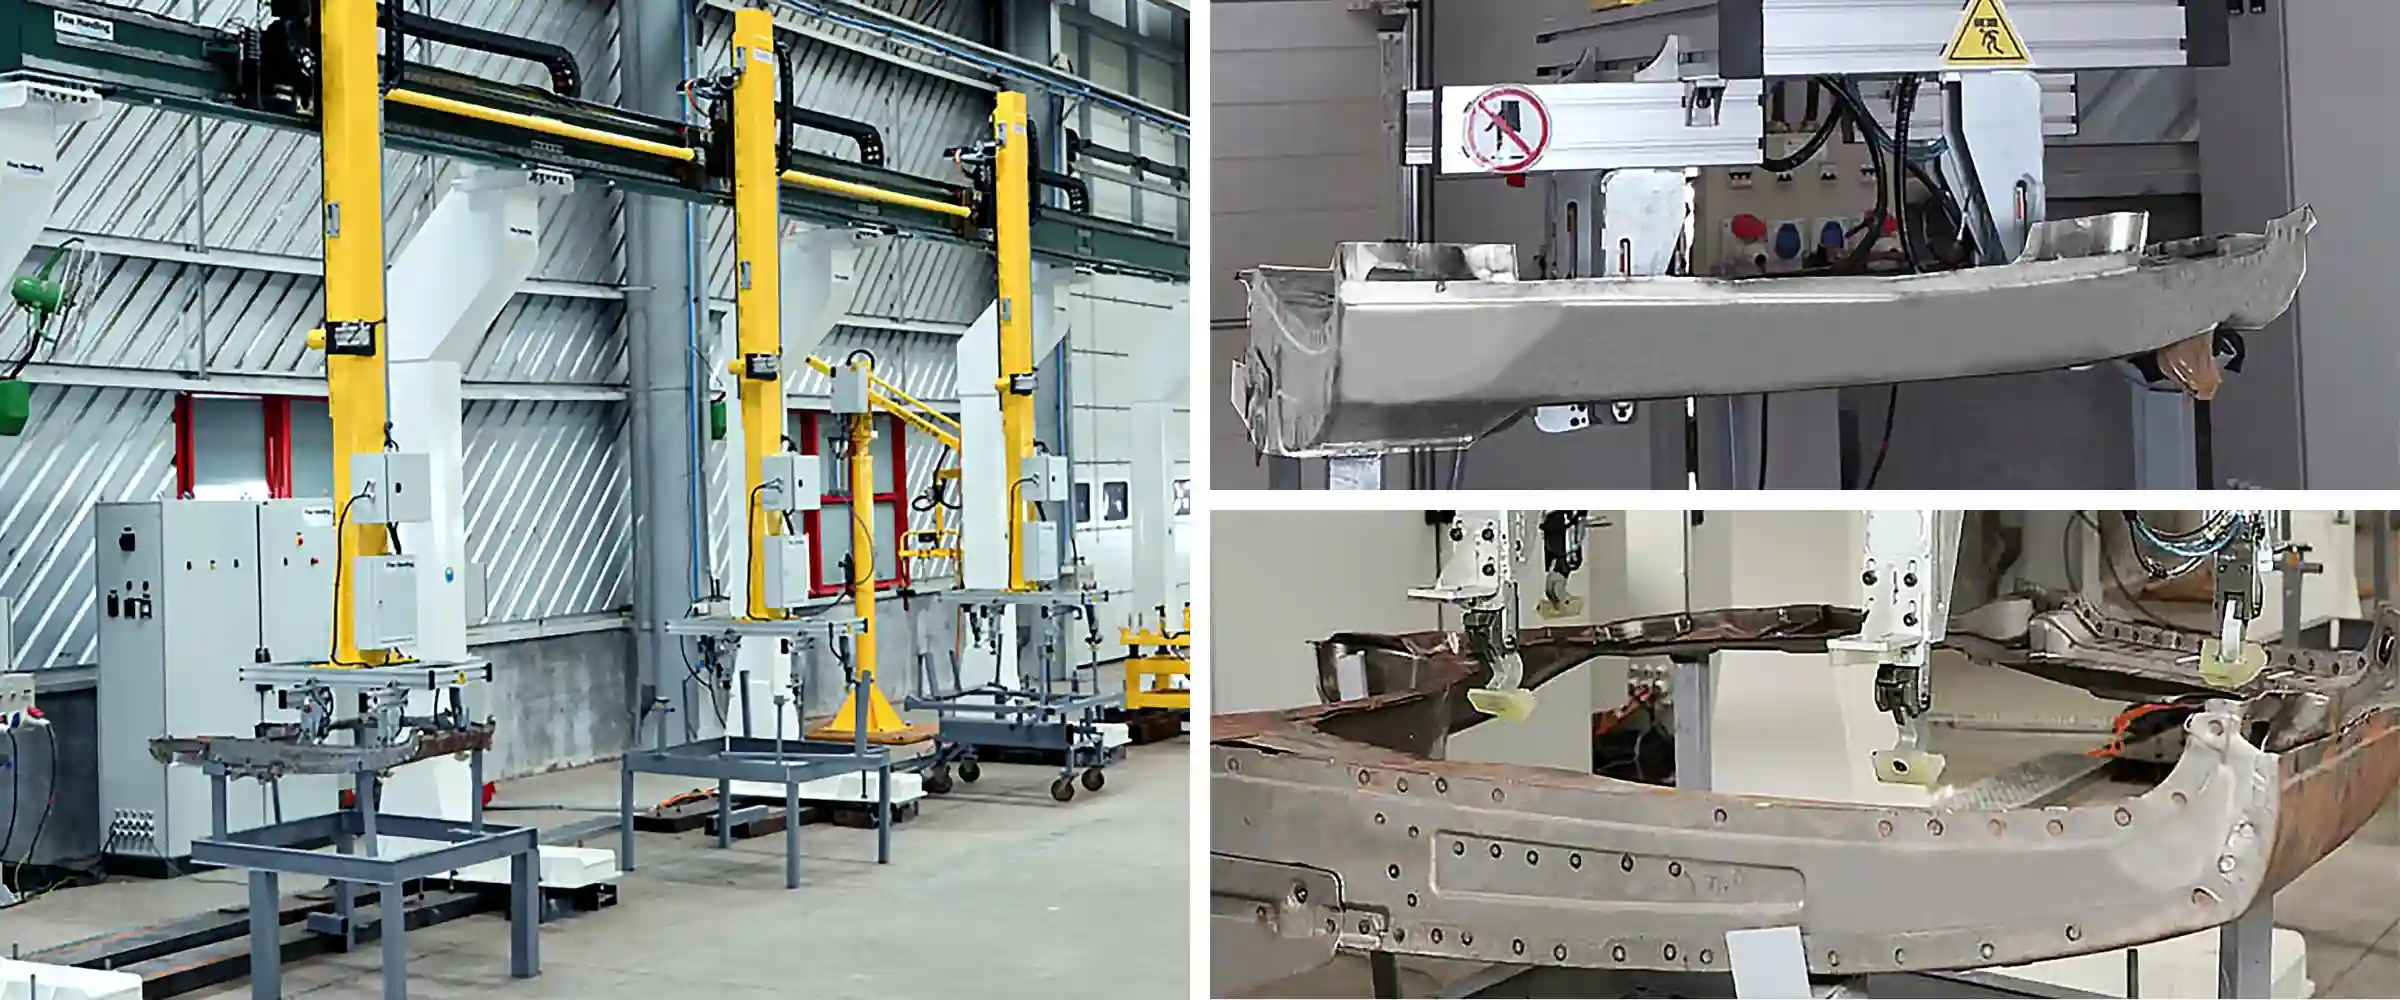 Gantry Systems for transfer of Automotive Doors